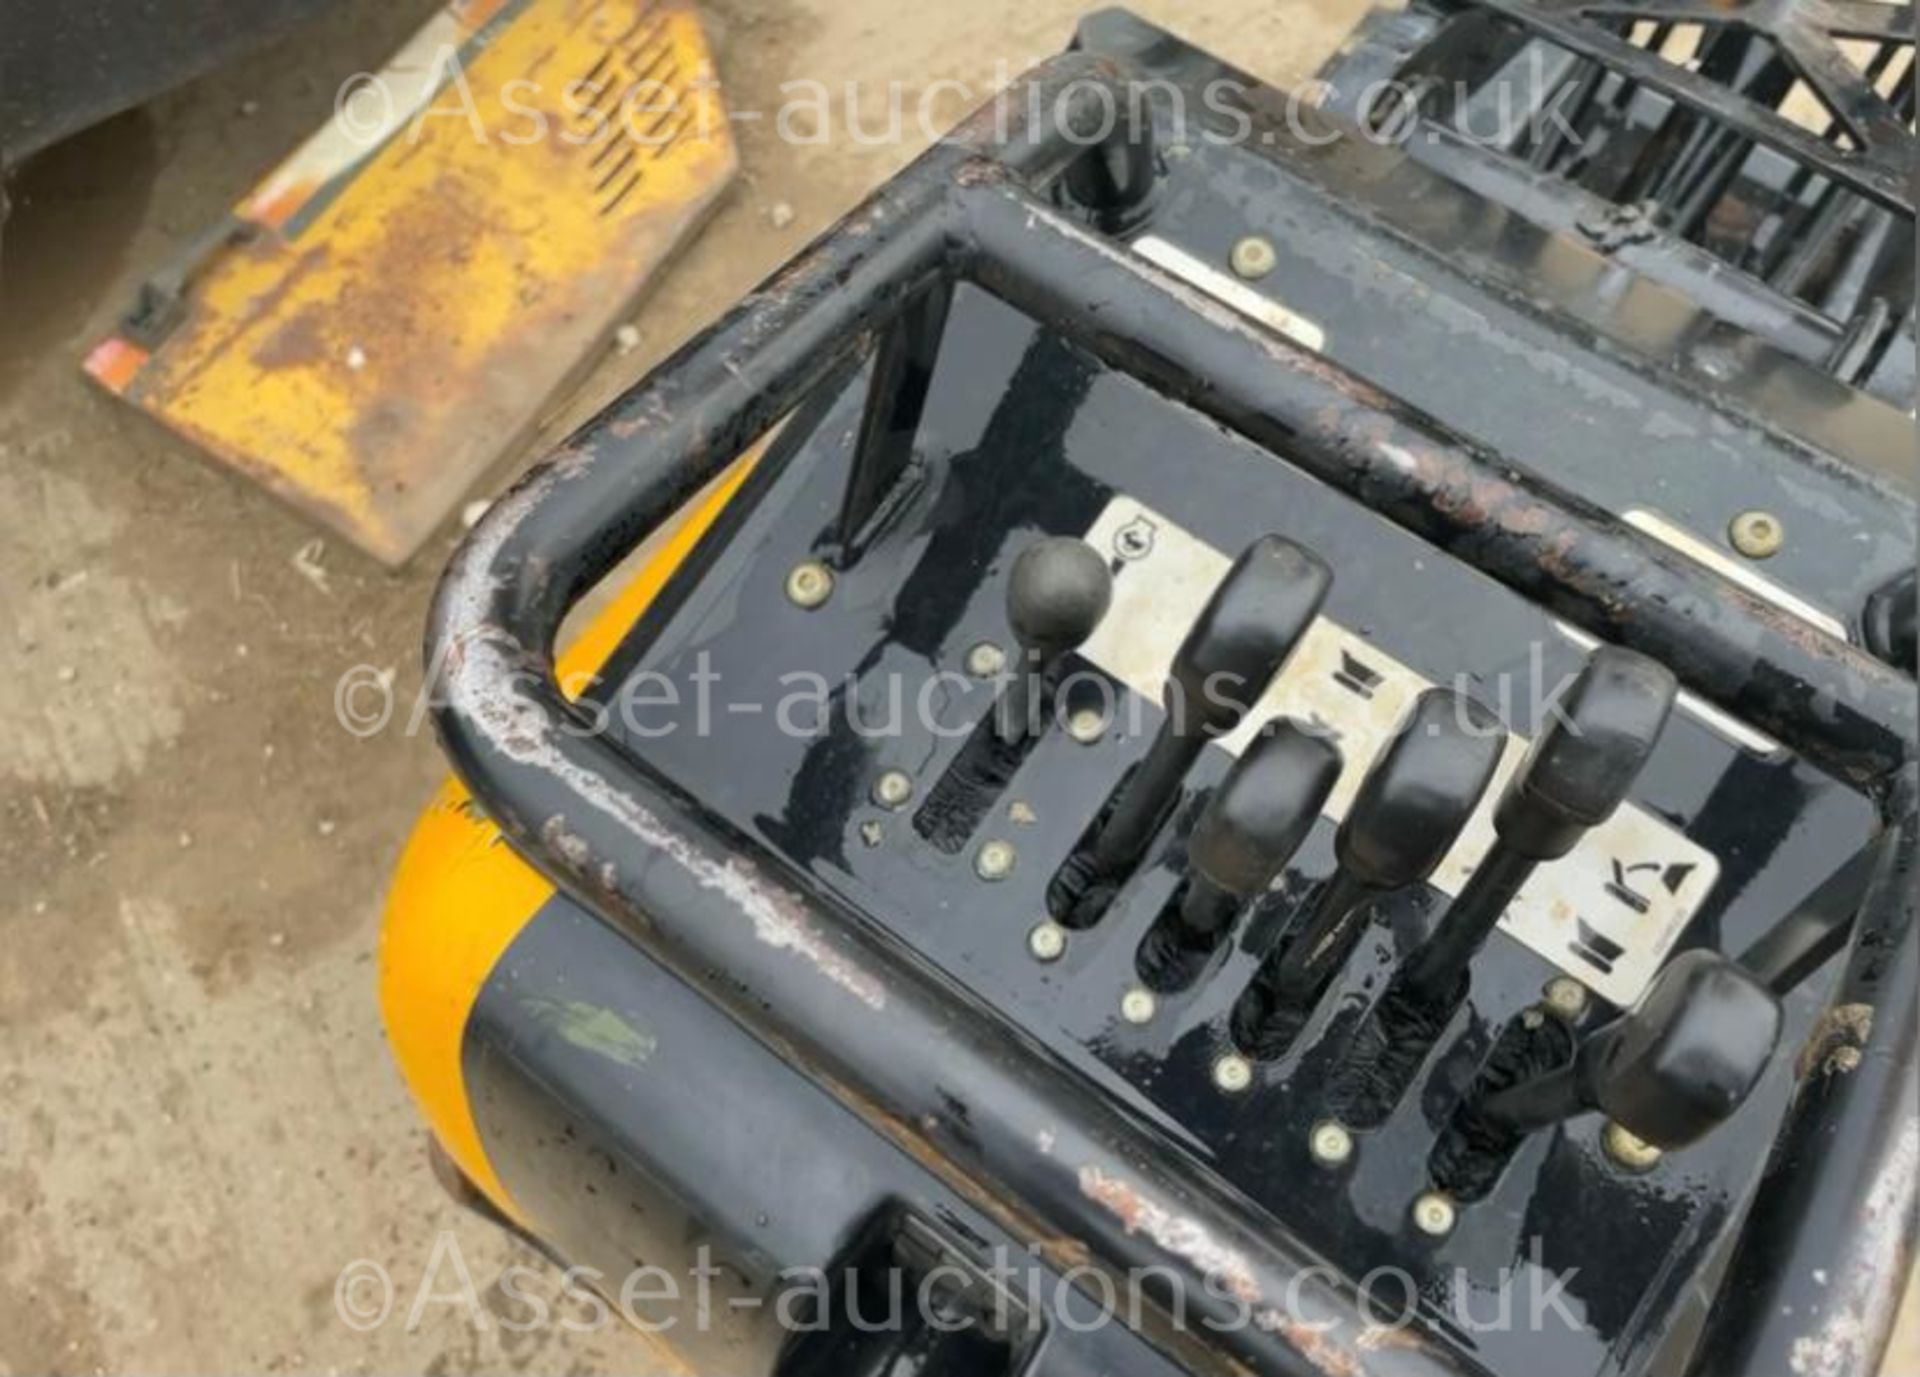 2019 JCB HTD-5 DIESEL TRACKED DUMPER, RUNS DRIVES AND WORKS WELL, ELECTRIC OR PULL START *PLUS VAT* - Image 8 of 10